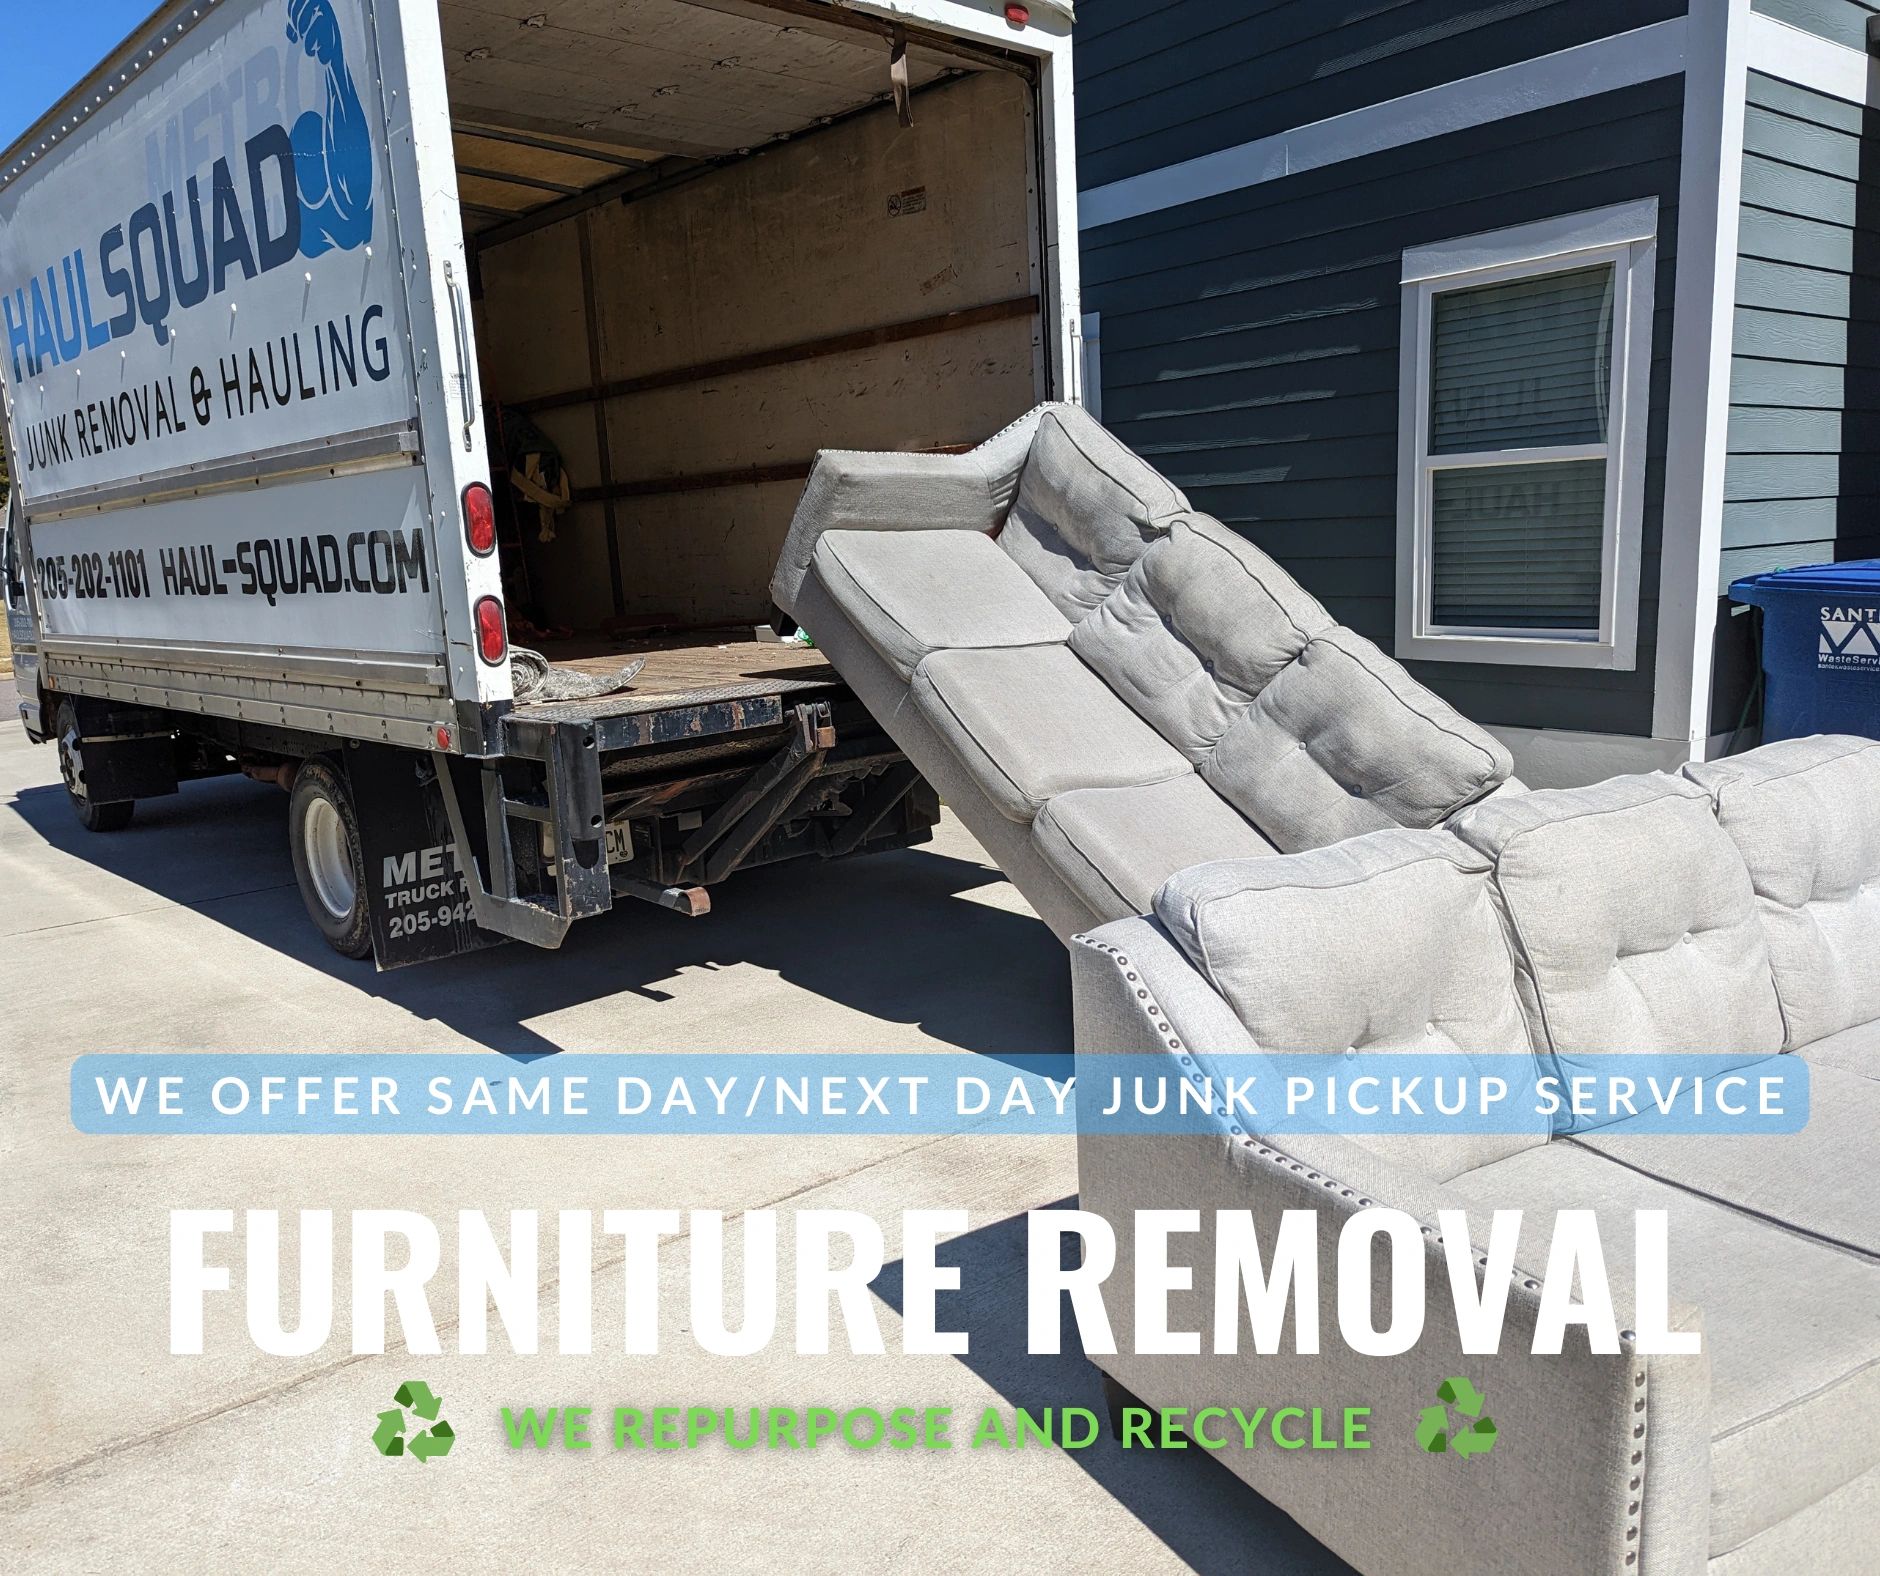 Junk Pick Up Removal and Hauling